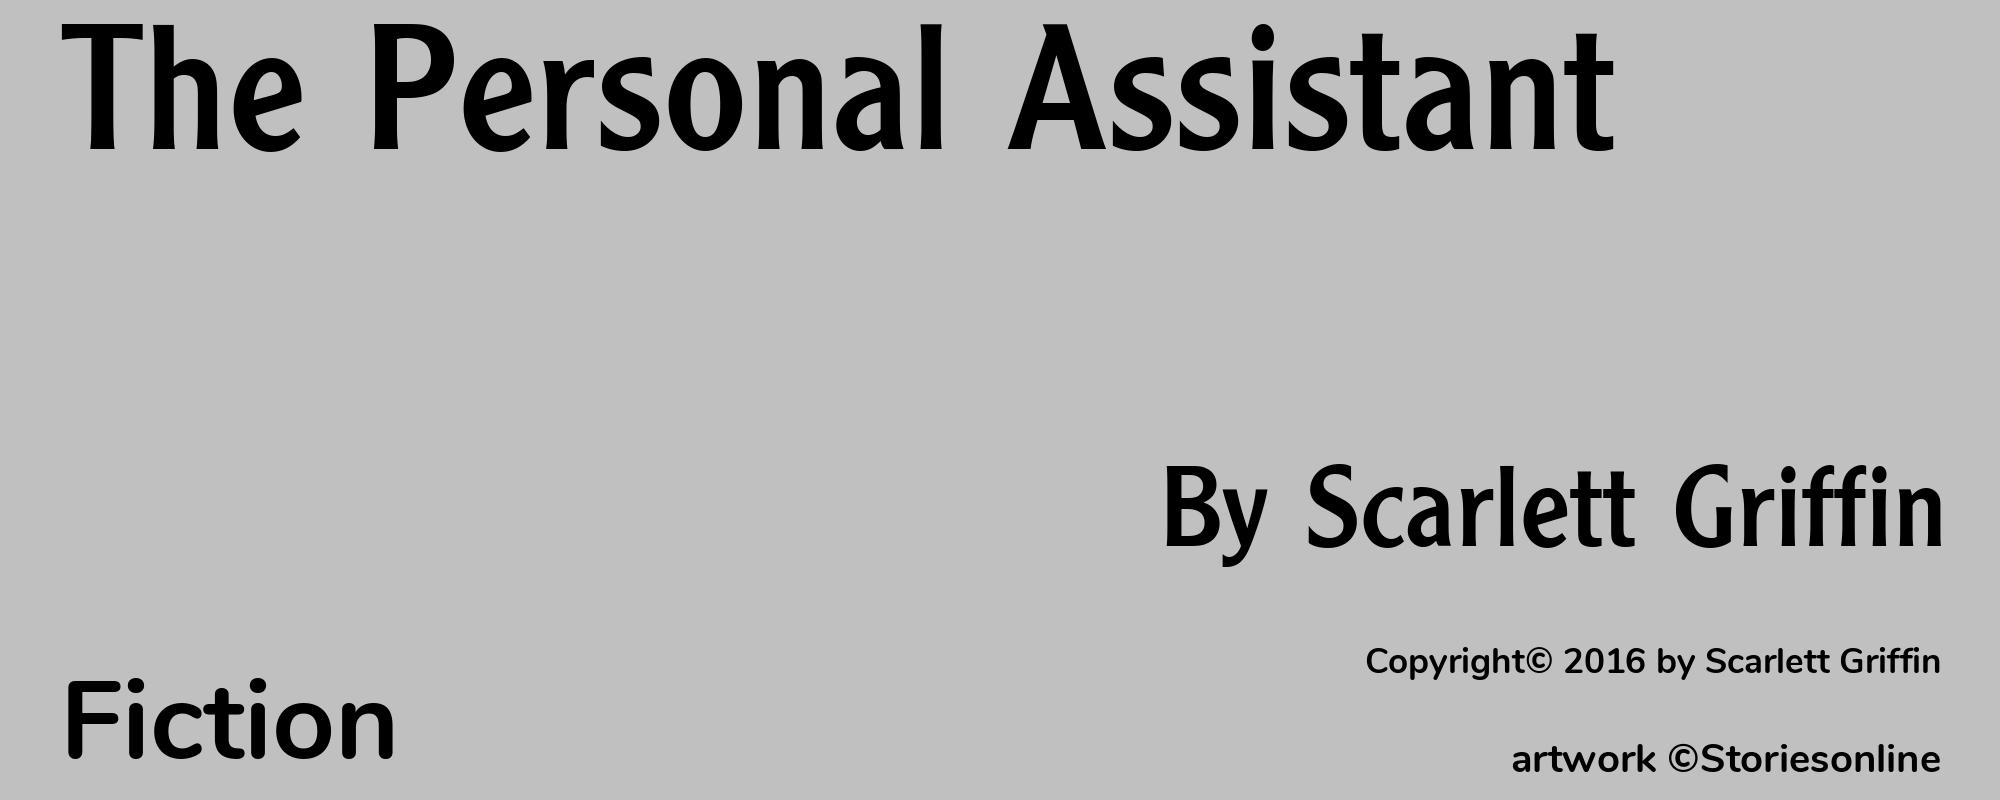 The Personal Assistant - Cover